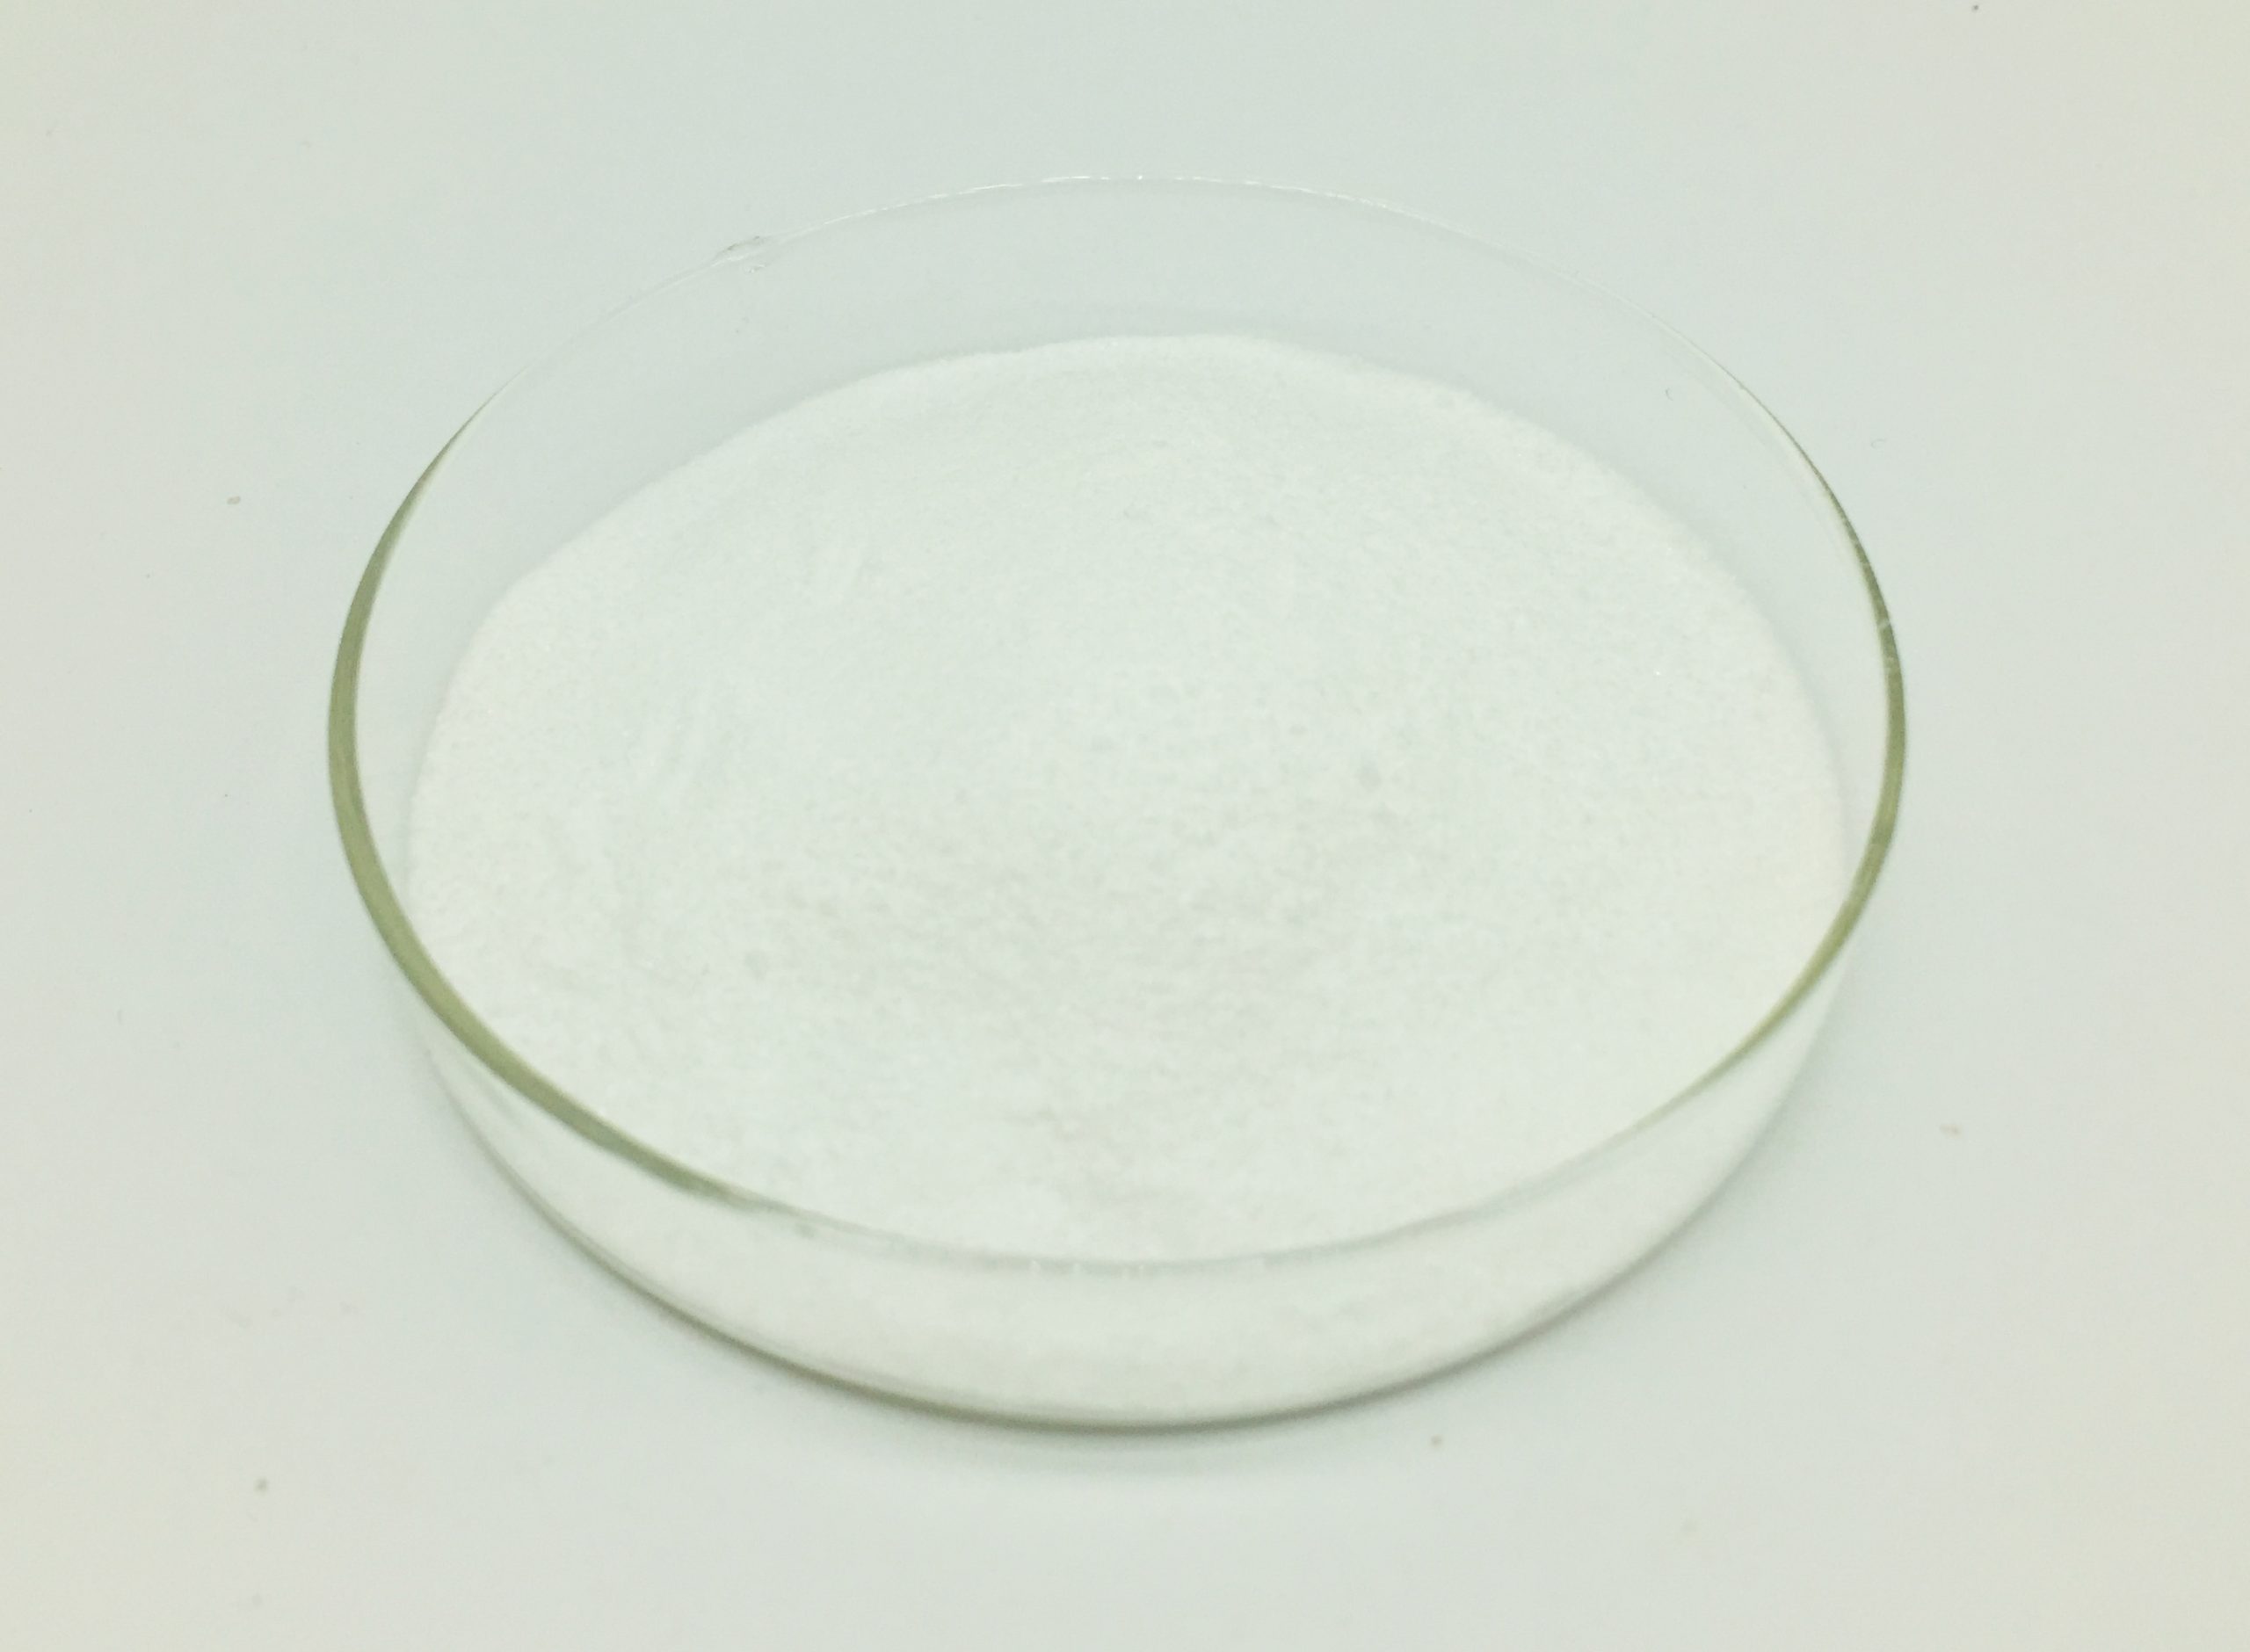 Materials and methods of Palmitoylethanolamide-Xi'an Lyphar Biotech Co., Ltd